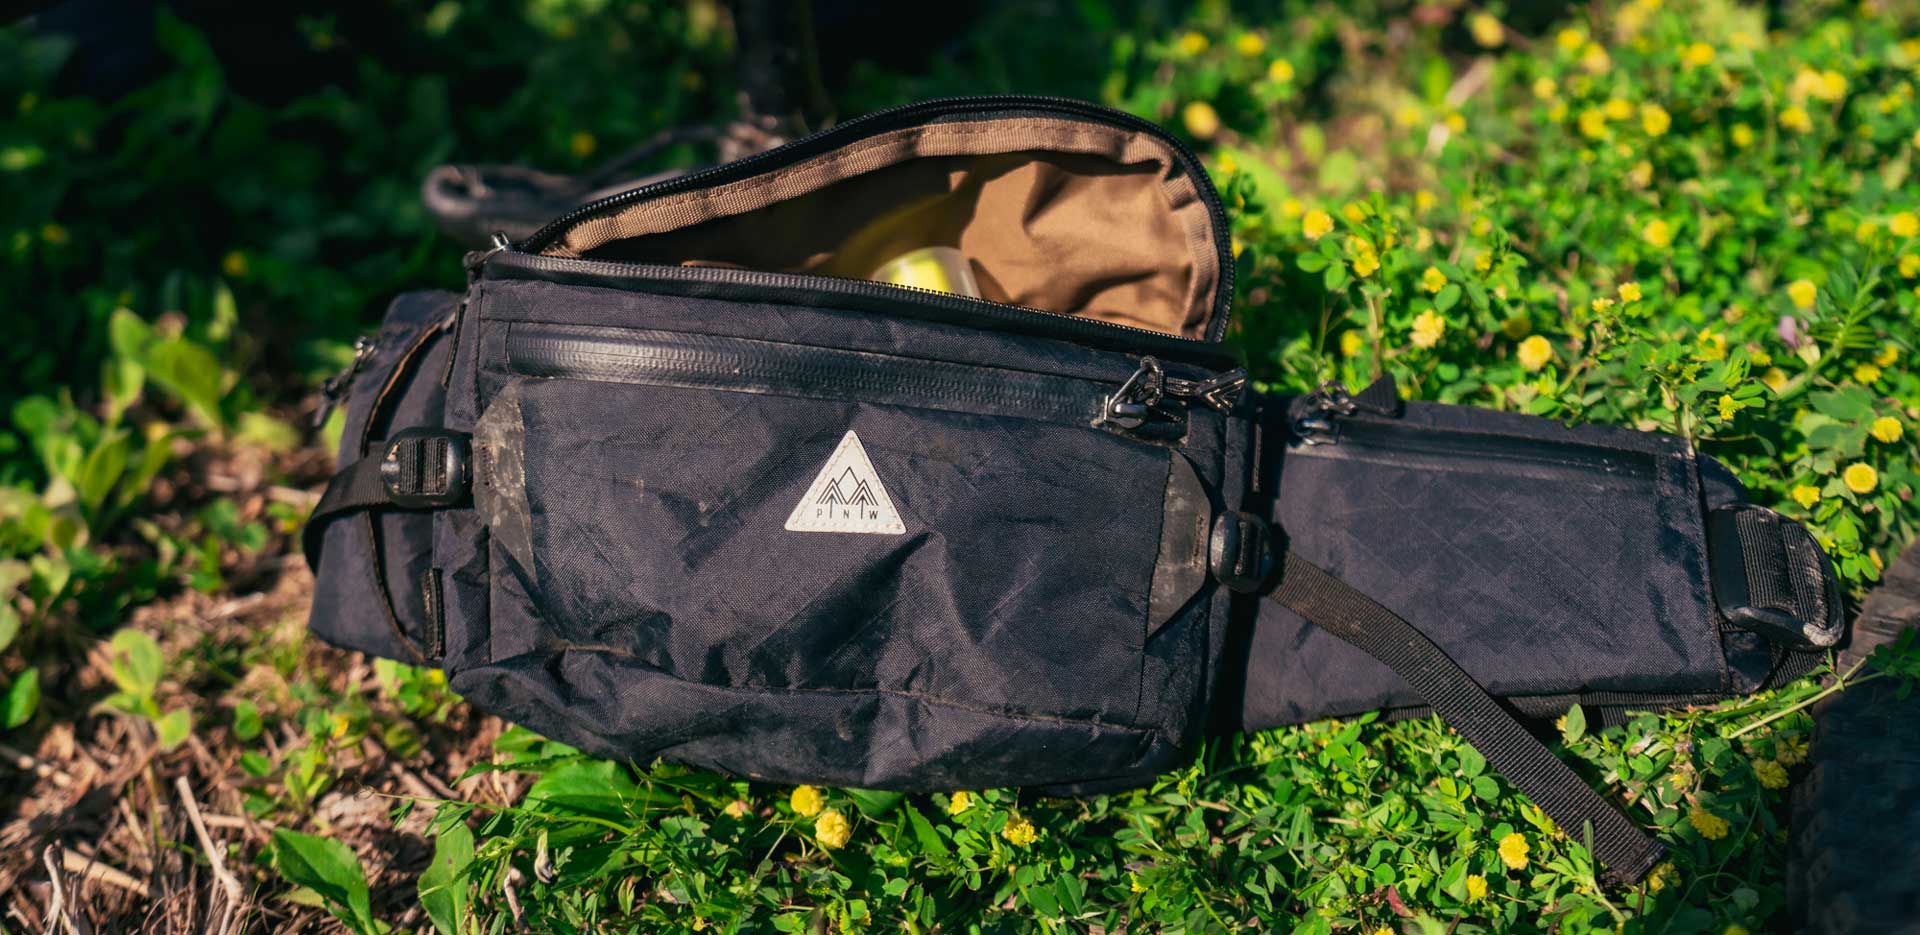 PNW Components Rover Hip Pack Review